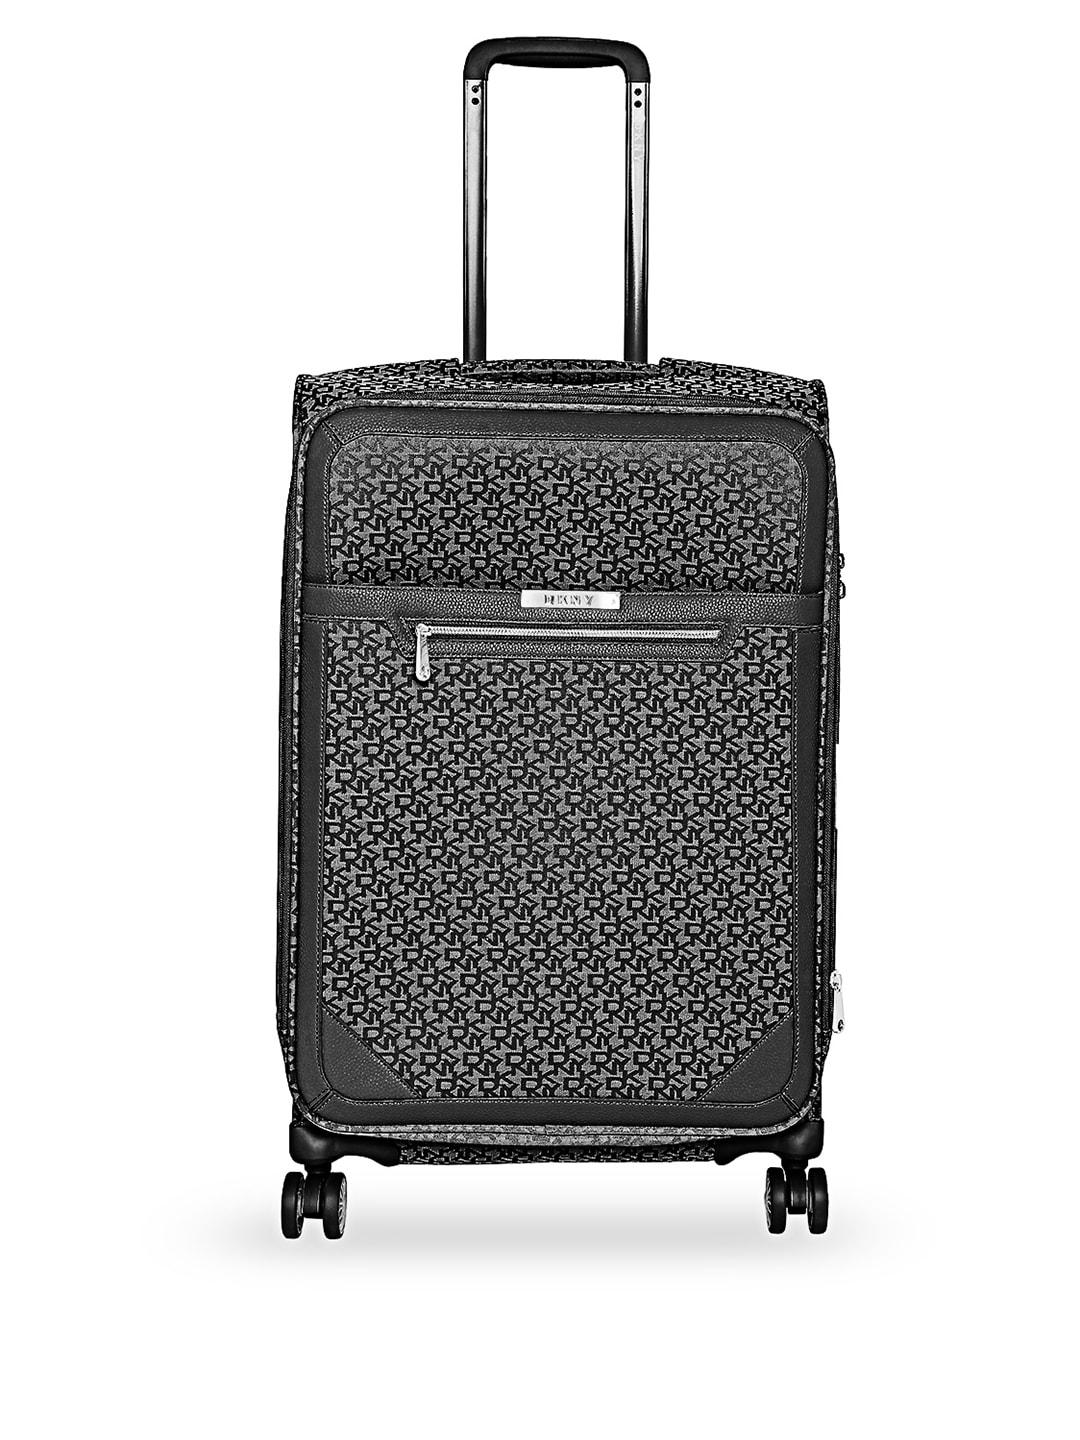 DKNY Unisex Black Patterned Signature Softs Soft-Sided Large Trolley Suitcase